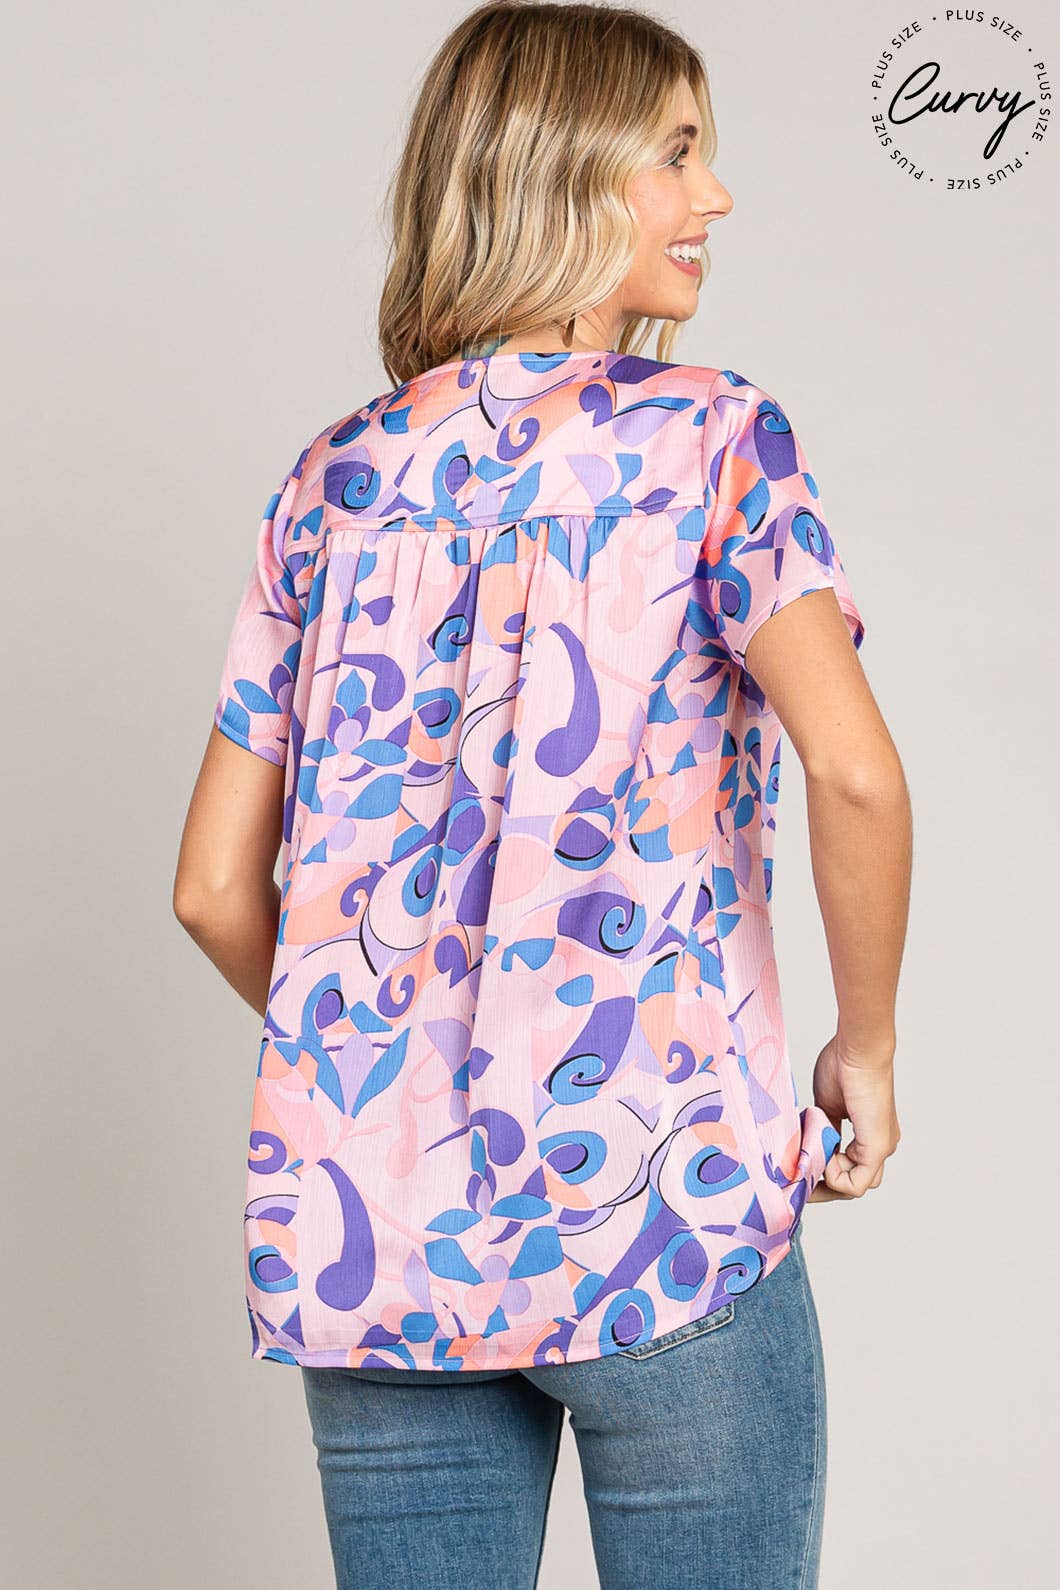 Curvy Lavender Abstract Top